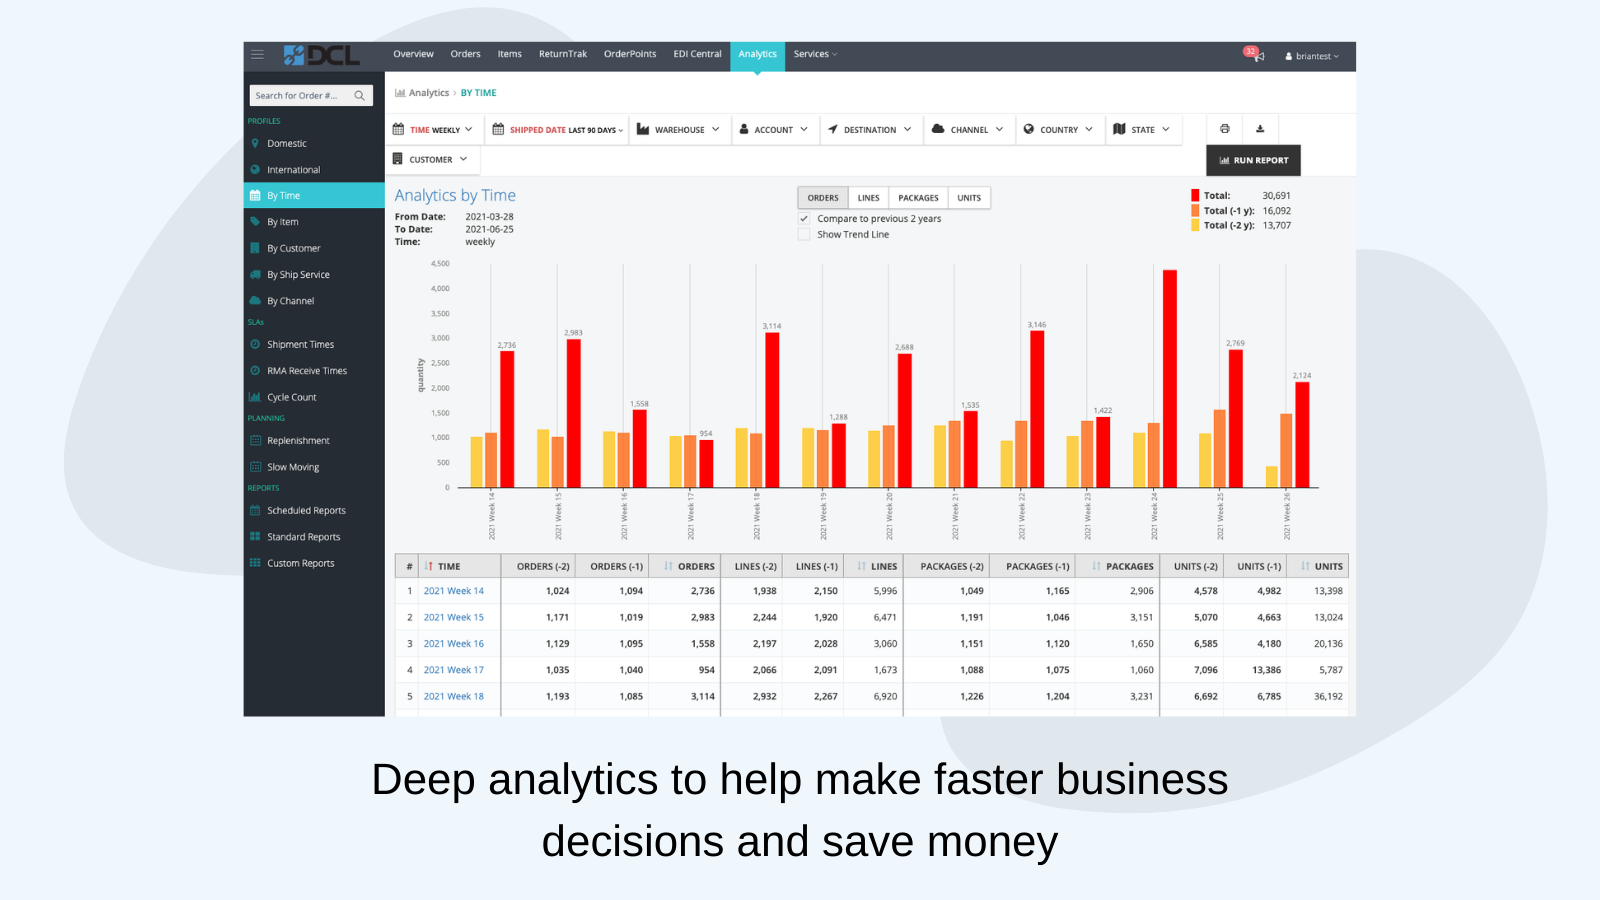 Deep analytics to make better decisions and save money